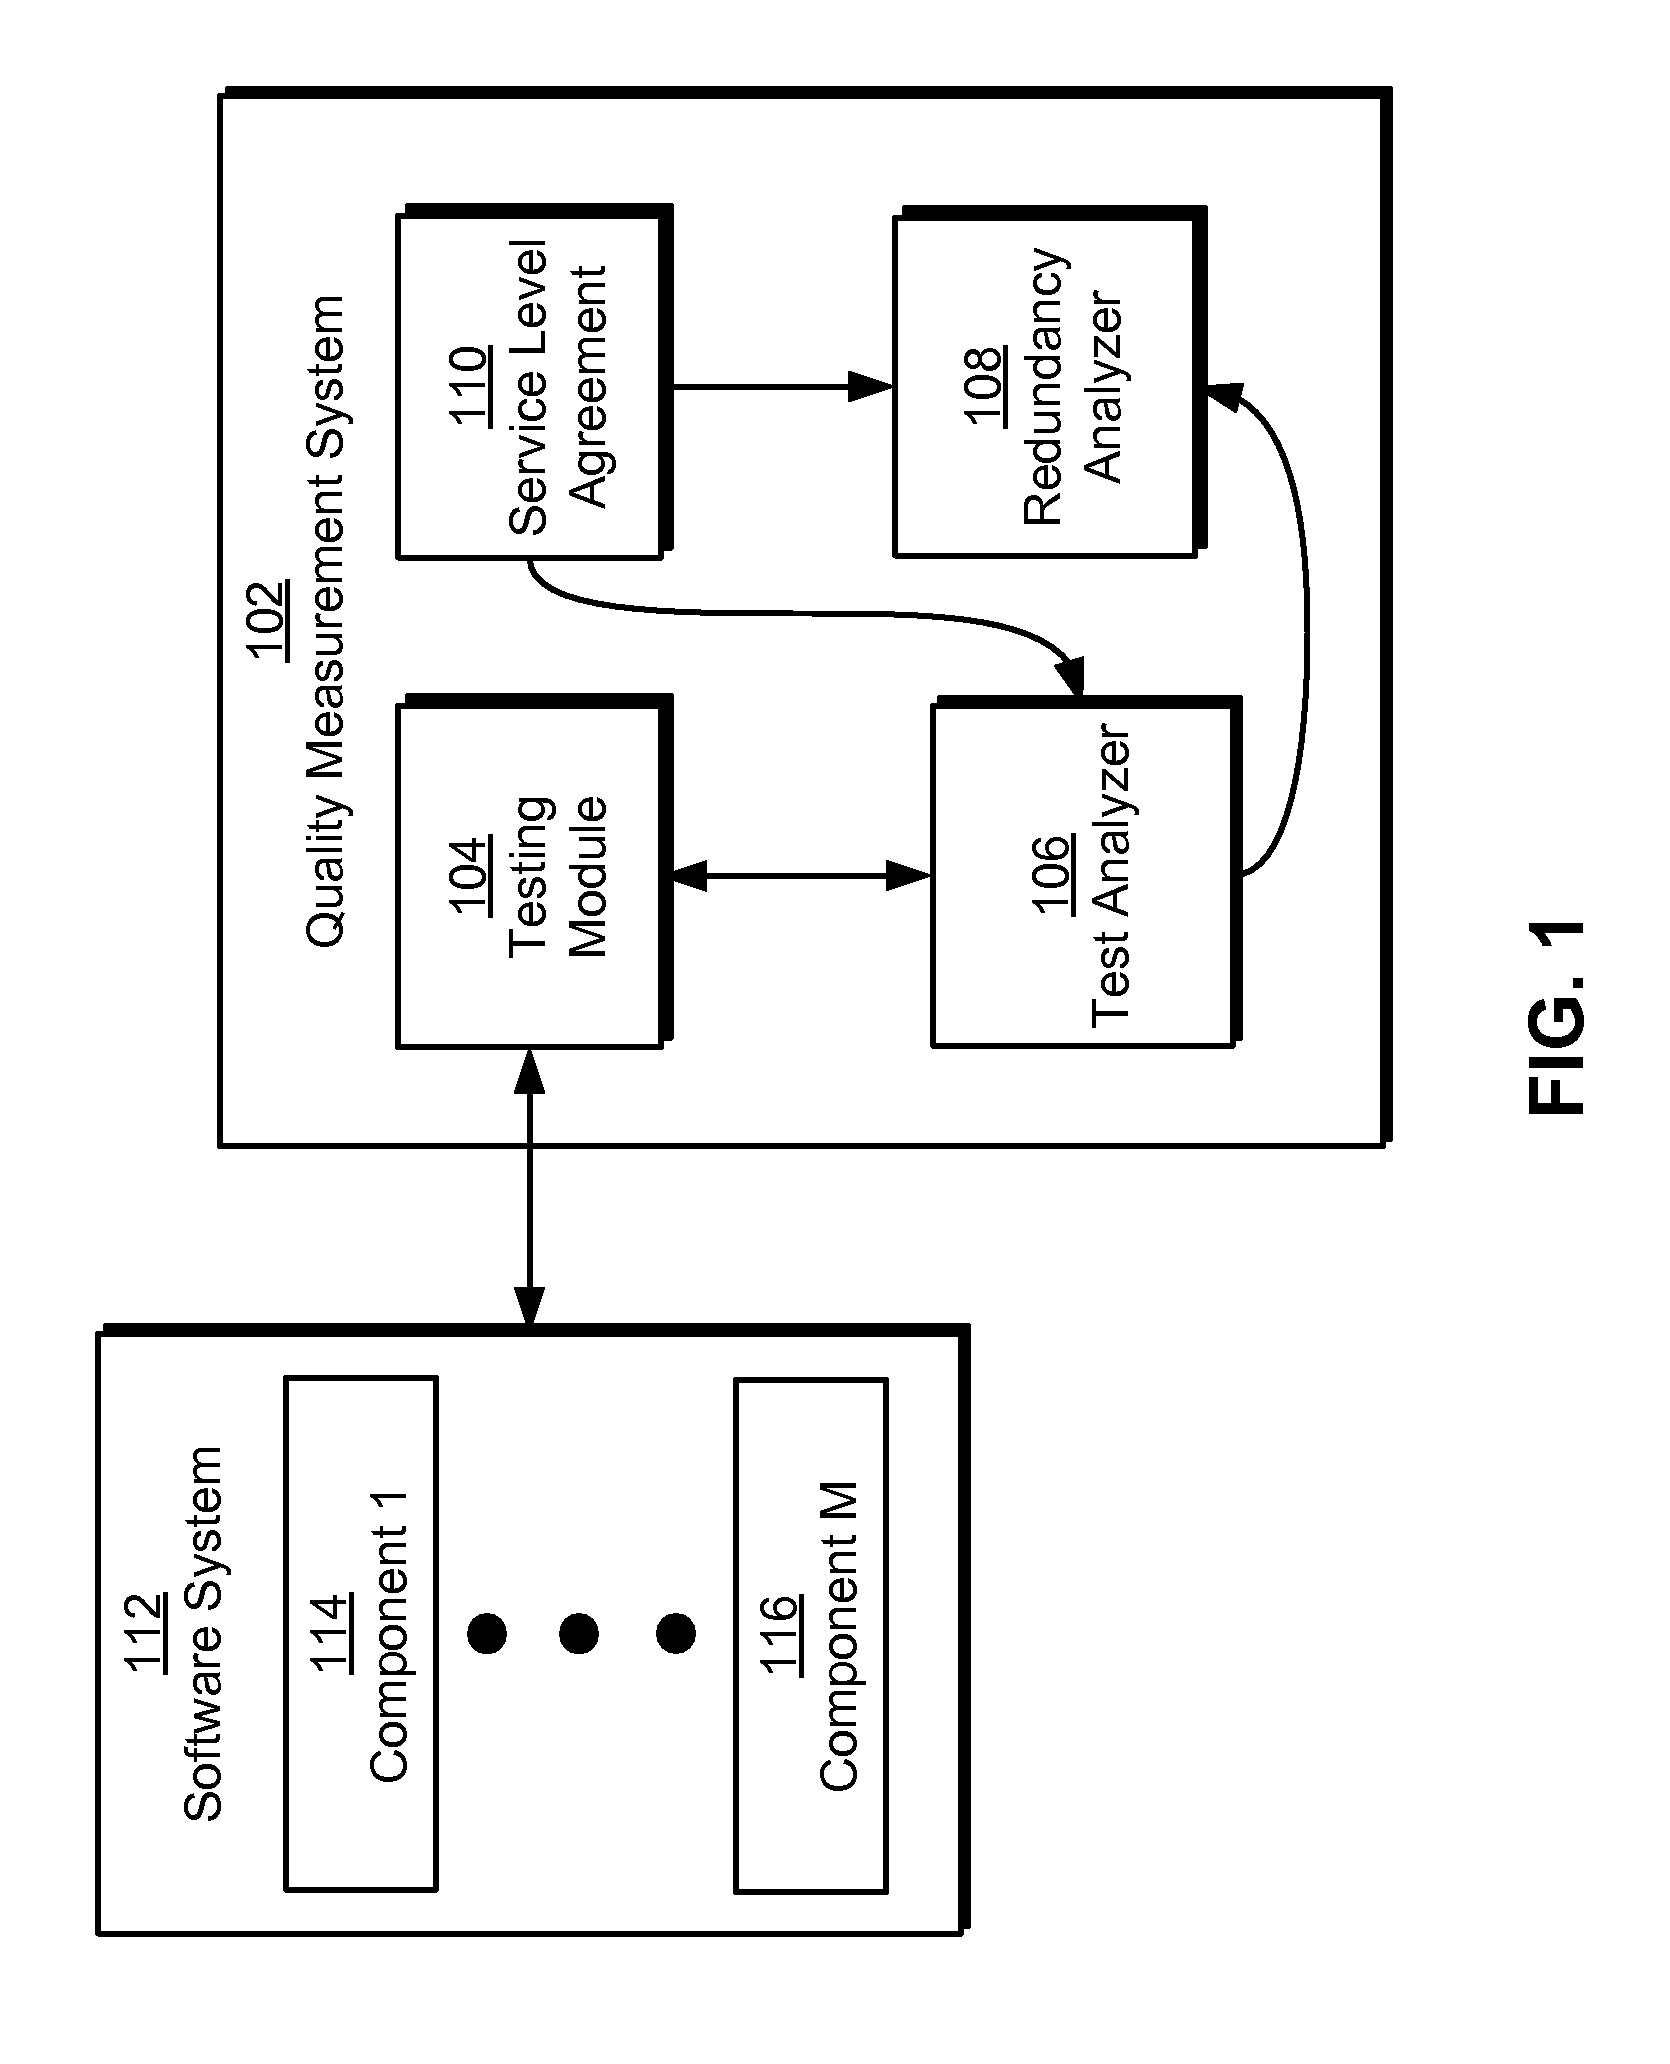 Method and system for predictive software system quality measurement